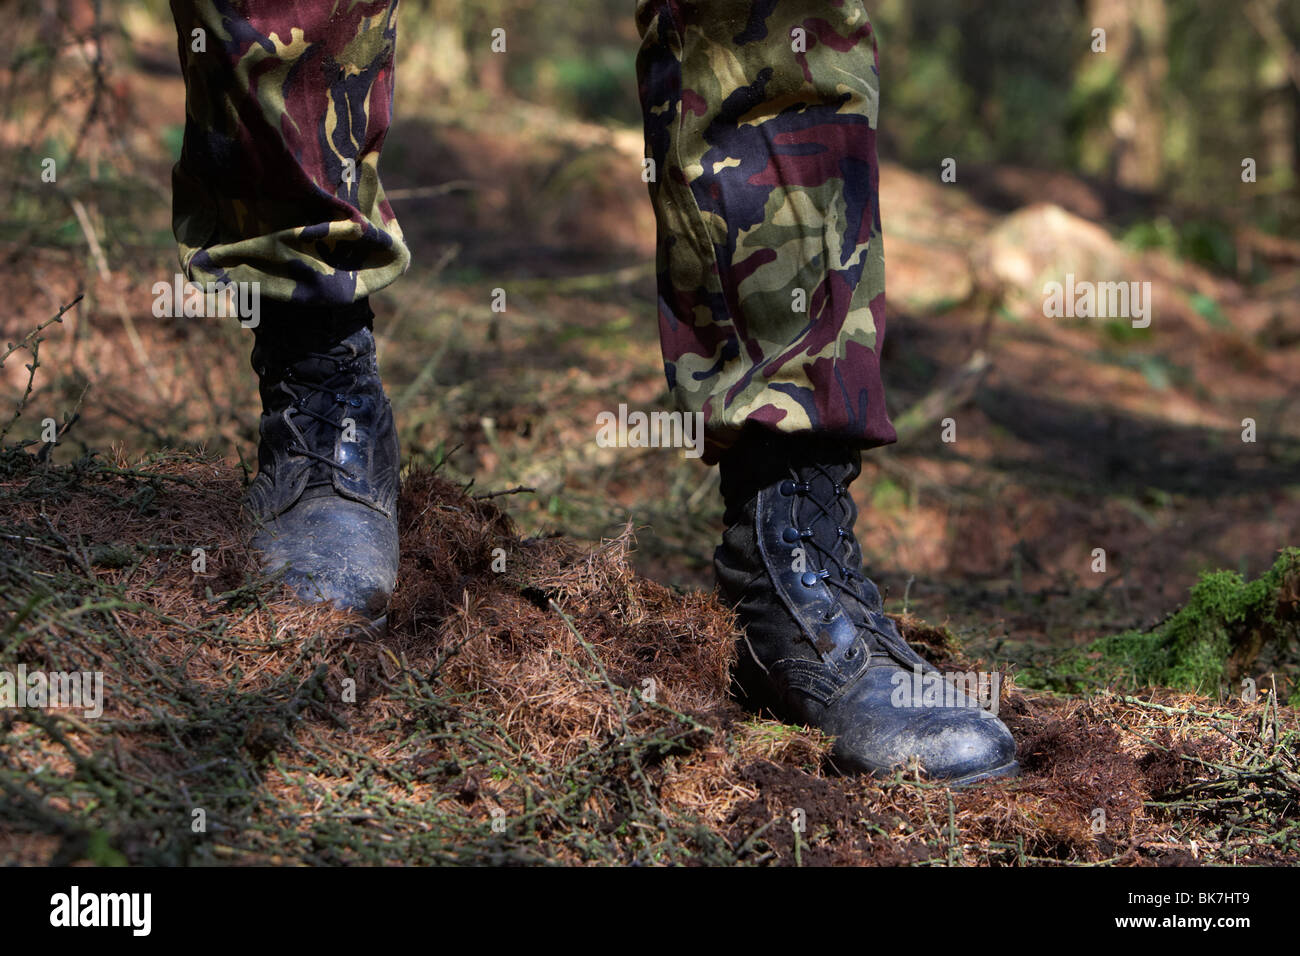 man wearing camouflage combat trousers and boots standing guard blocking the way in a forest in the uk Stock Photo